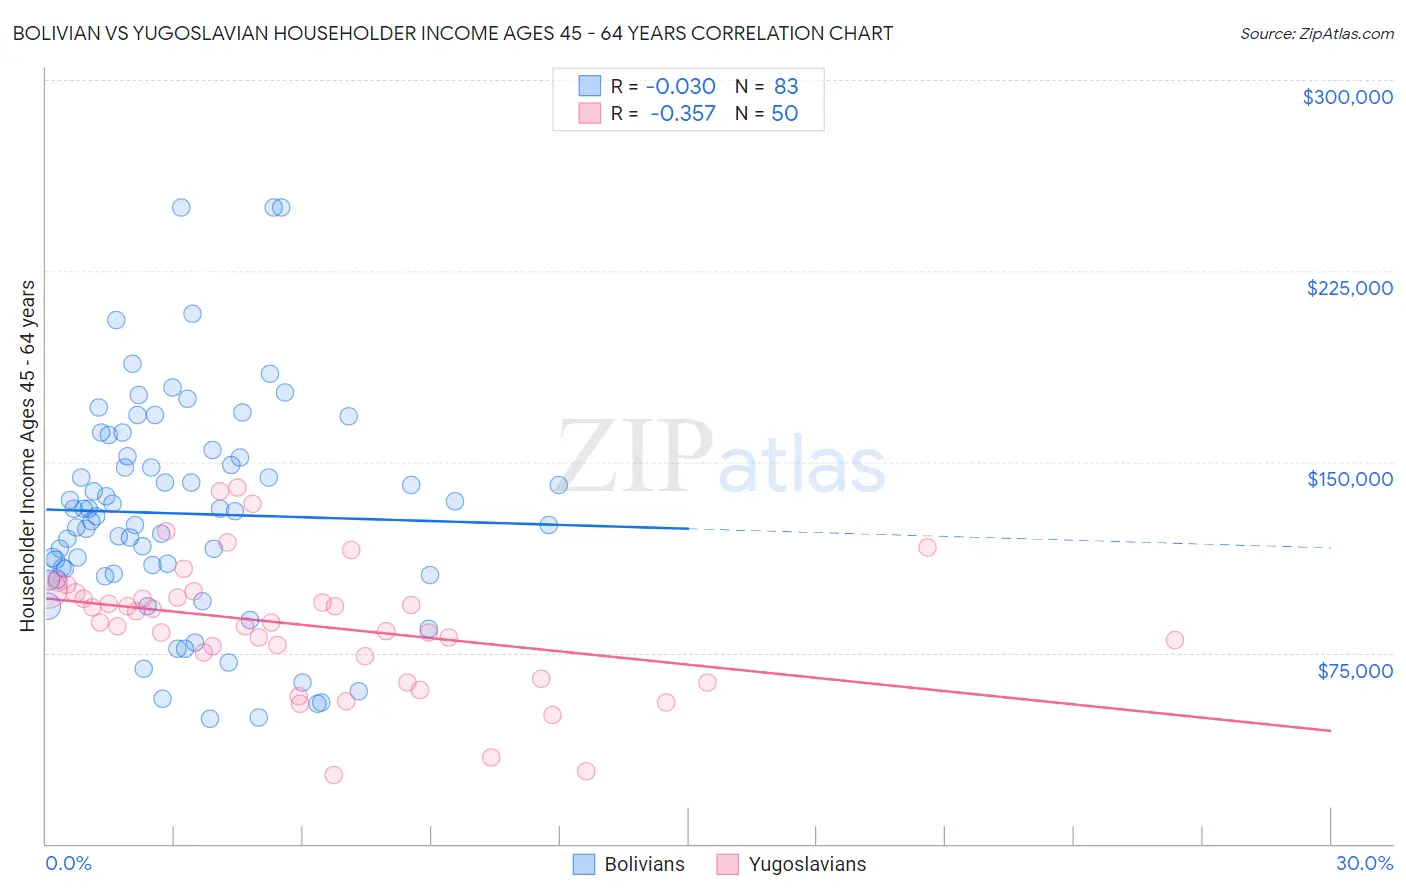 Bolivian vs Yugoslavian Householder Income Ages 45 - 64 years